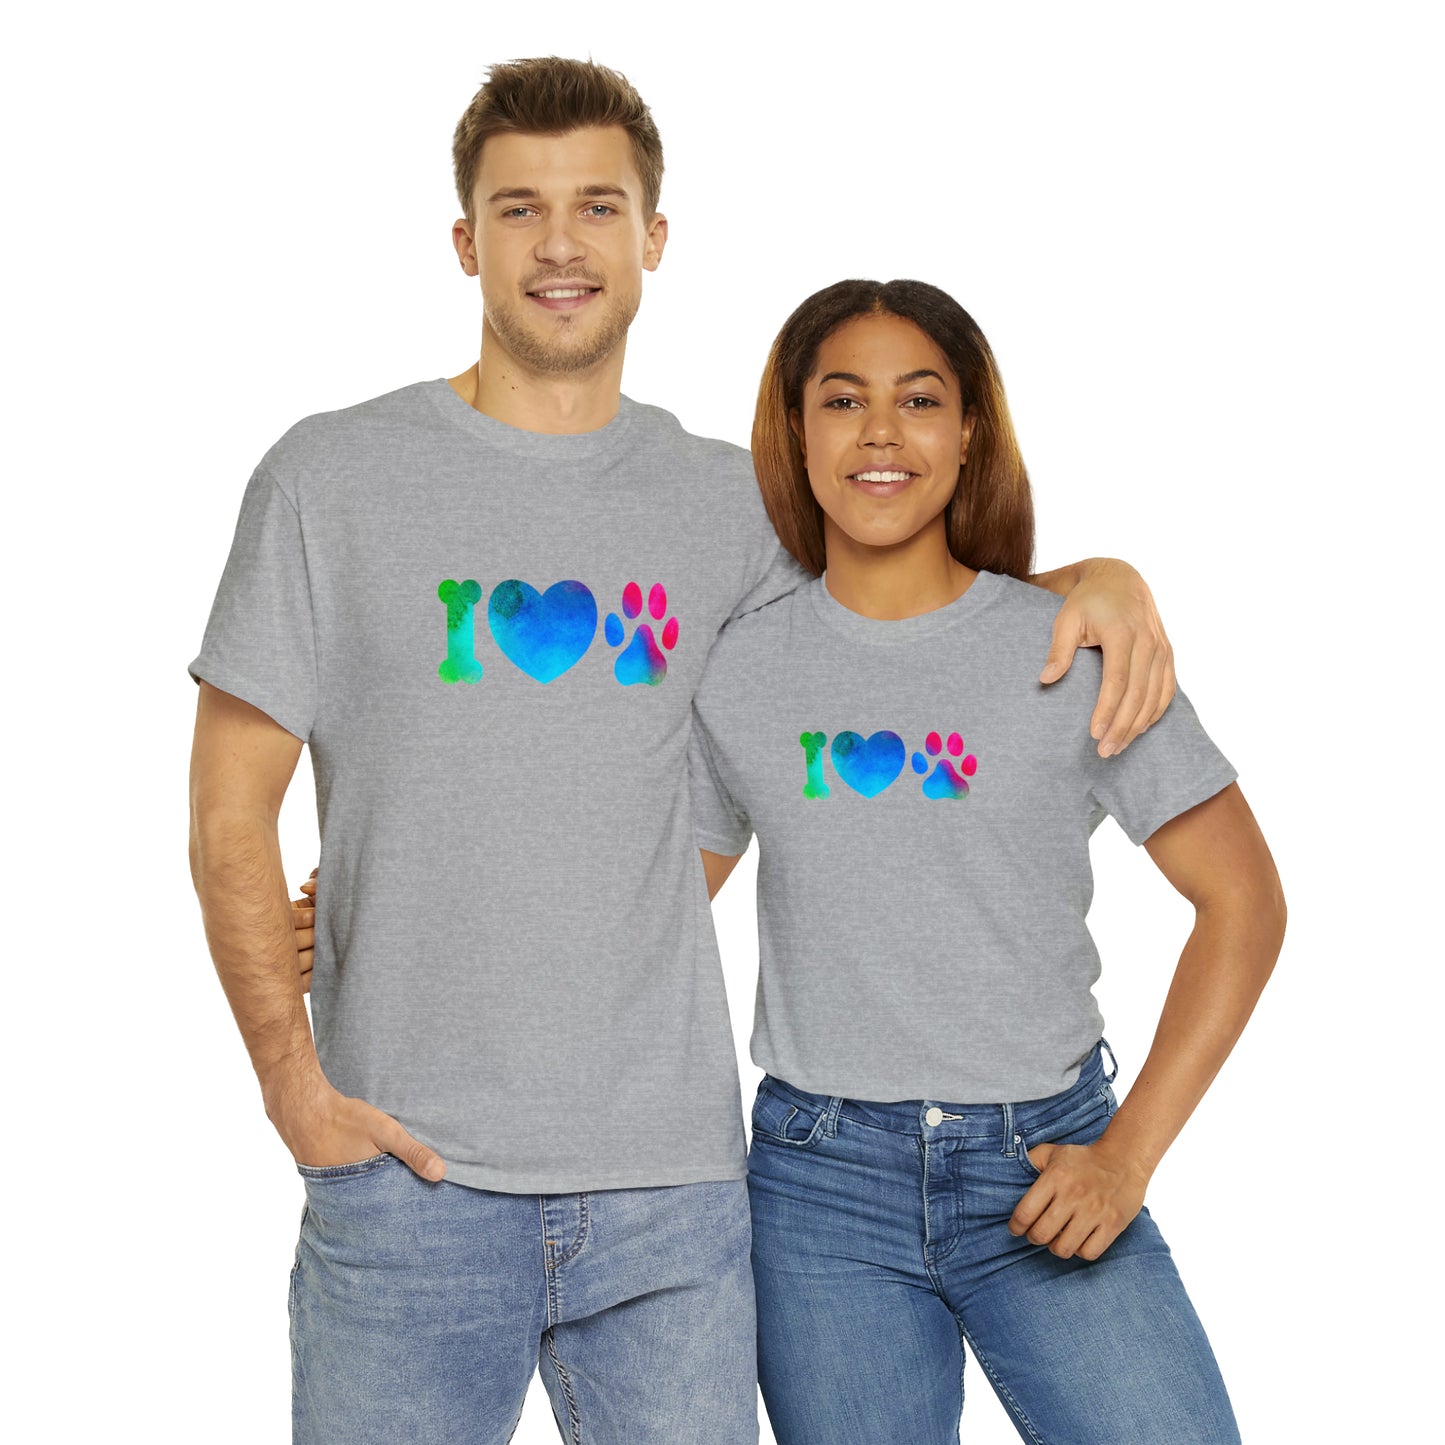 Mock up of a man and a woman; both wearing the shirt